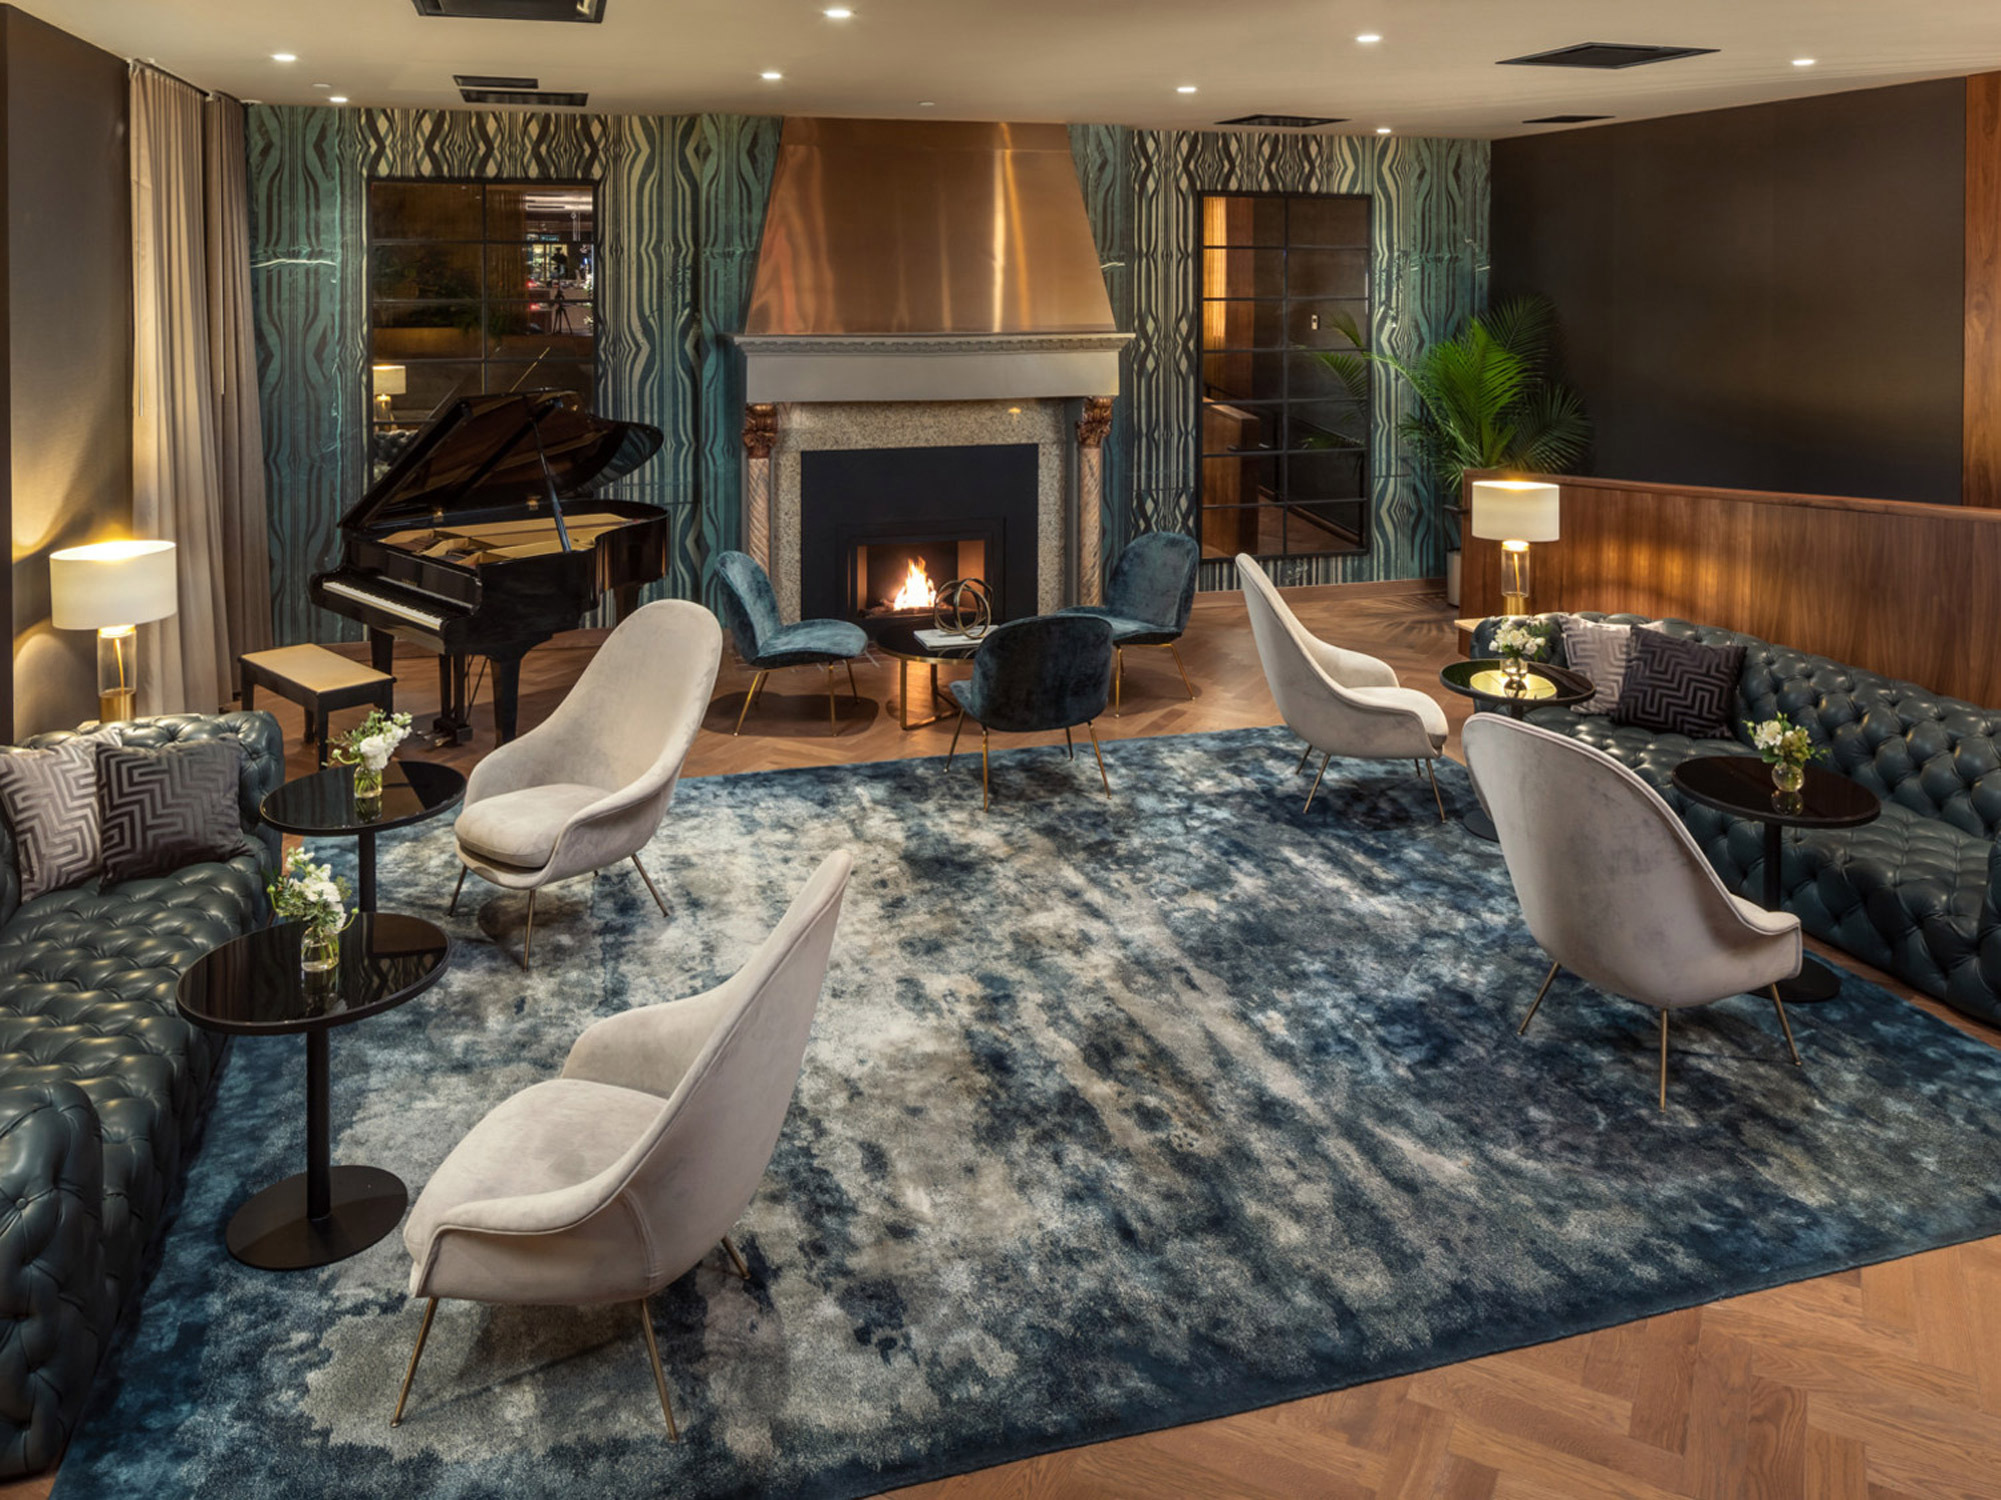 Elegant lounge area showcases a blend of textures, with a plush blue area rug anchoring sleek, ivory armchairs and a tufted leather sofa. A fireplace with a classic mantel serves as the focal point, flanked by rich teal curtains and a grand piano, enhancing the sophisticated ambiance.